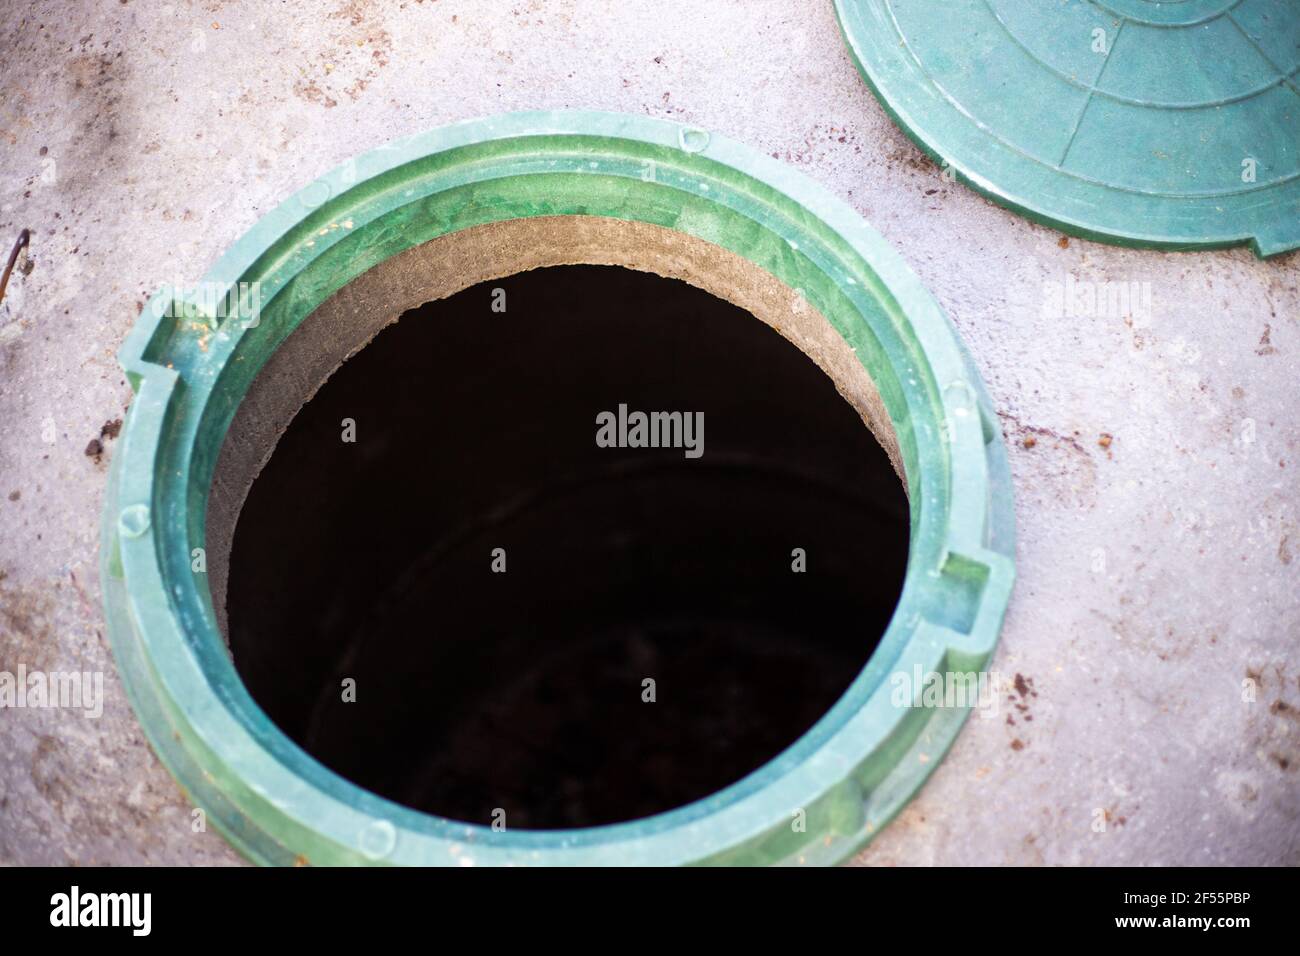 Construction of a septic tank. Large concrete rings with an open sewer hatch, unprotected by a cover from falls and accidents.. Stock Photo